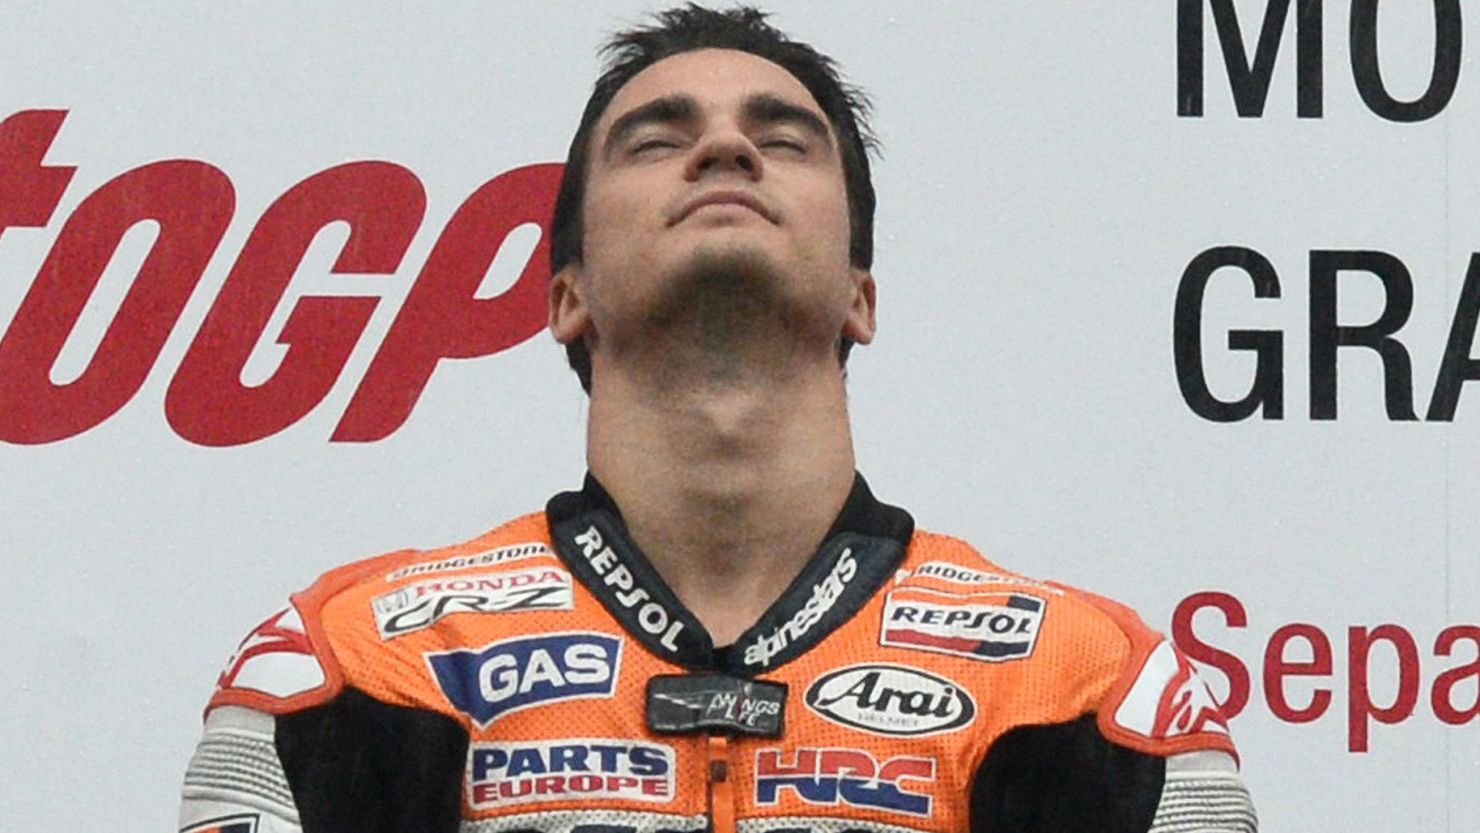 Dani Pedrosa savors his victory in the Malaysian MotoGP at Sepang which boosts his title hopes.